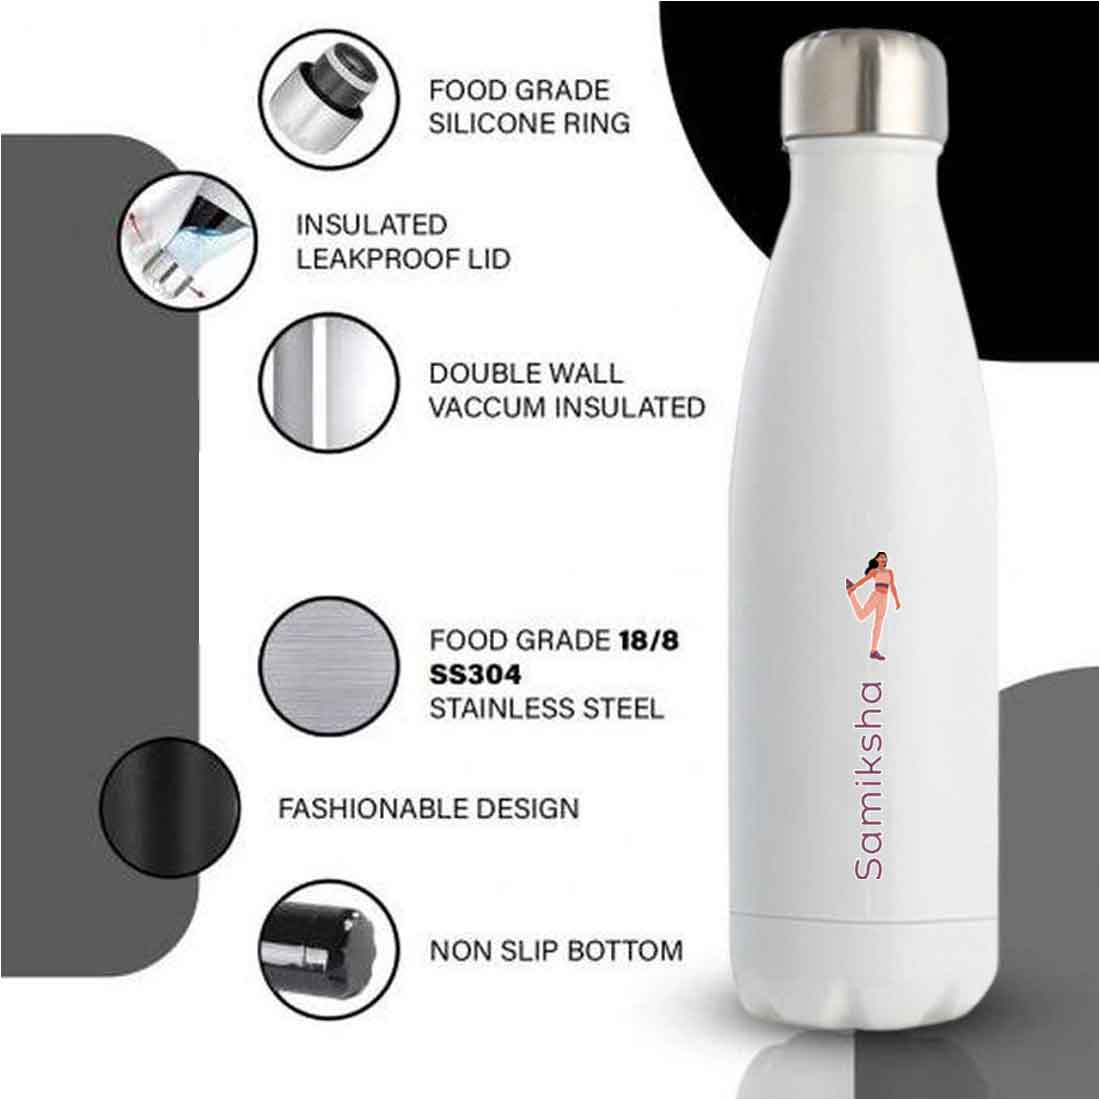 Name Printed Water Bottles - Insulated Stainless Steel Water Bottle